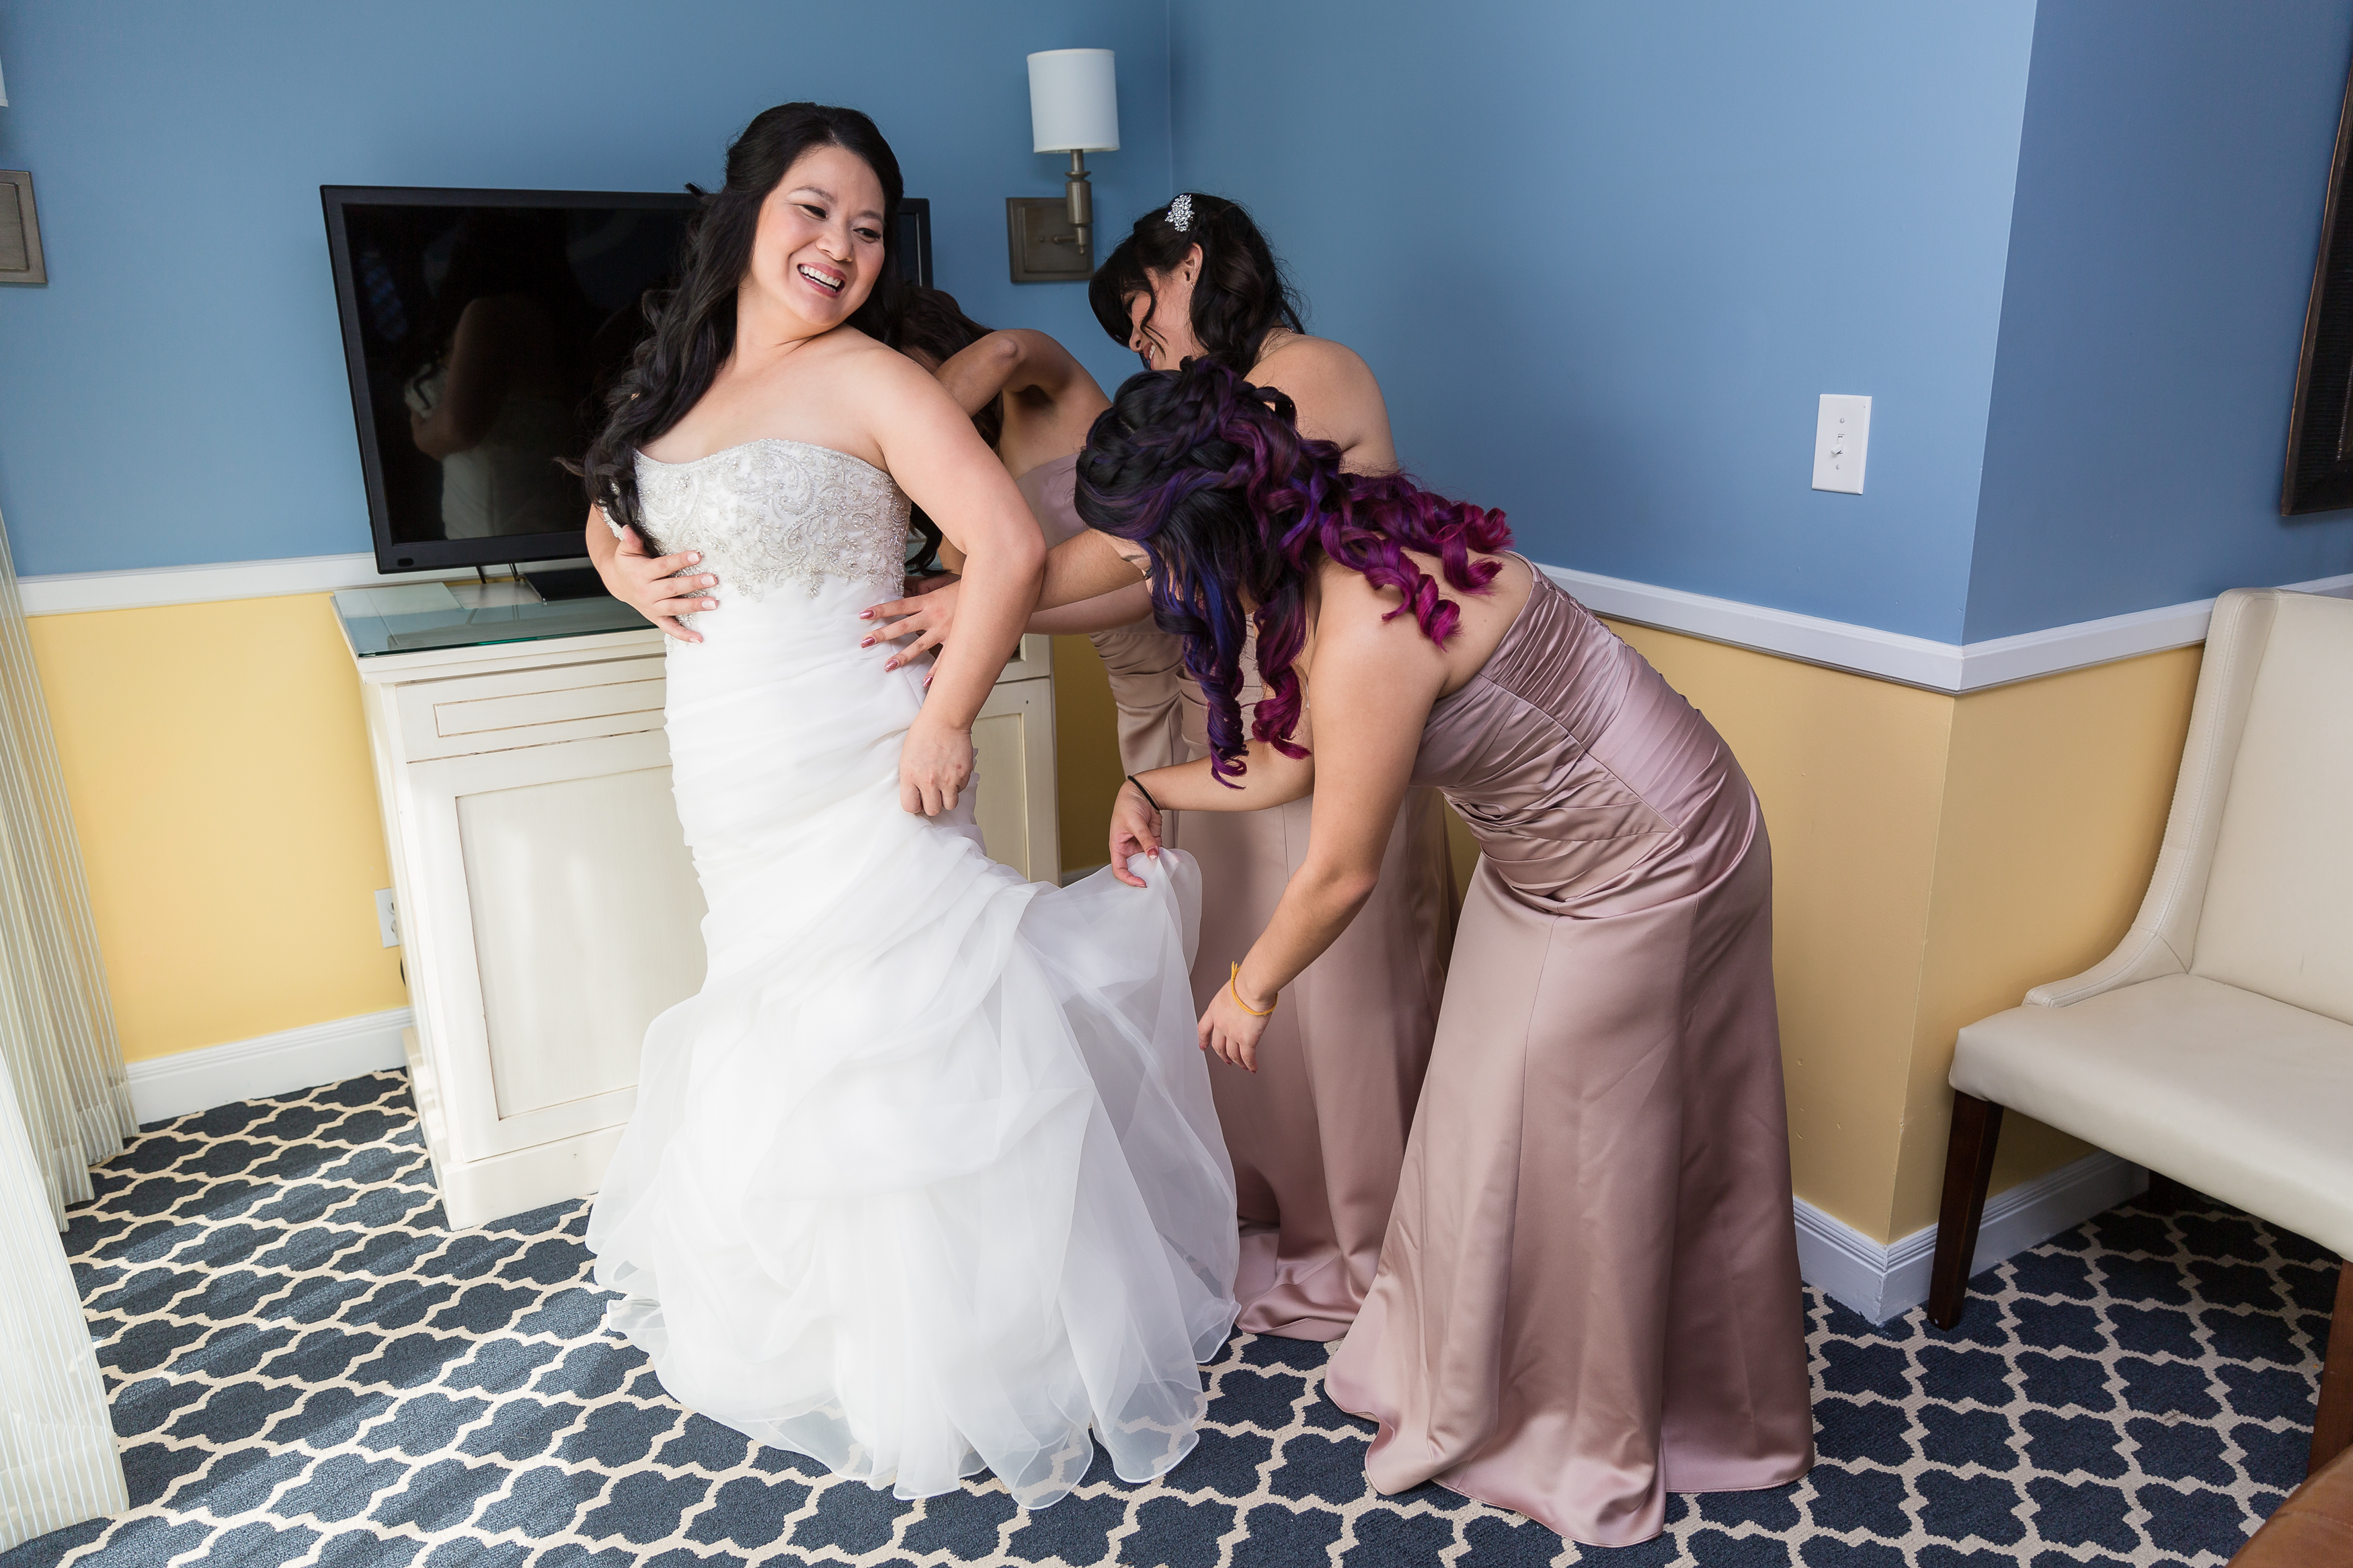 Bride with bridesmaids getting ready